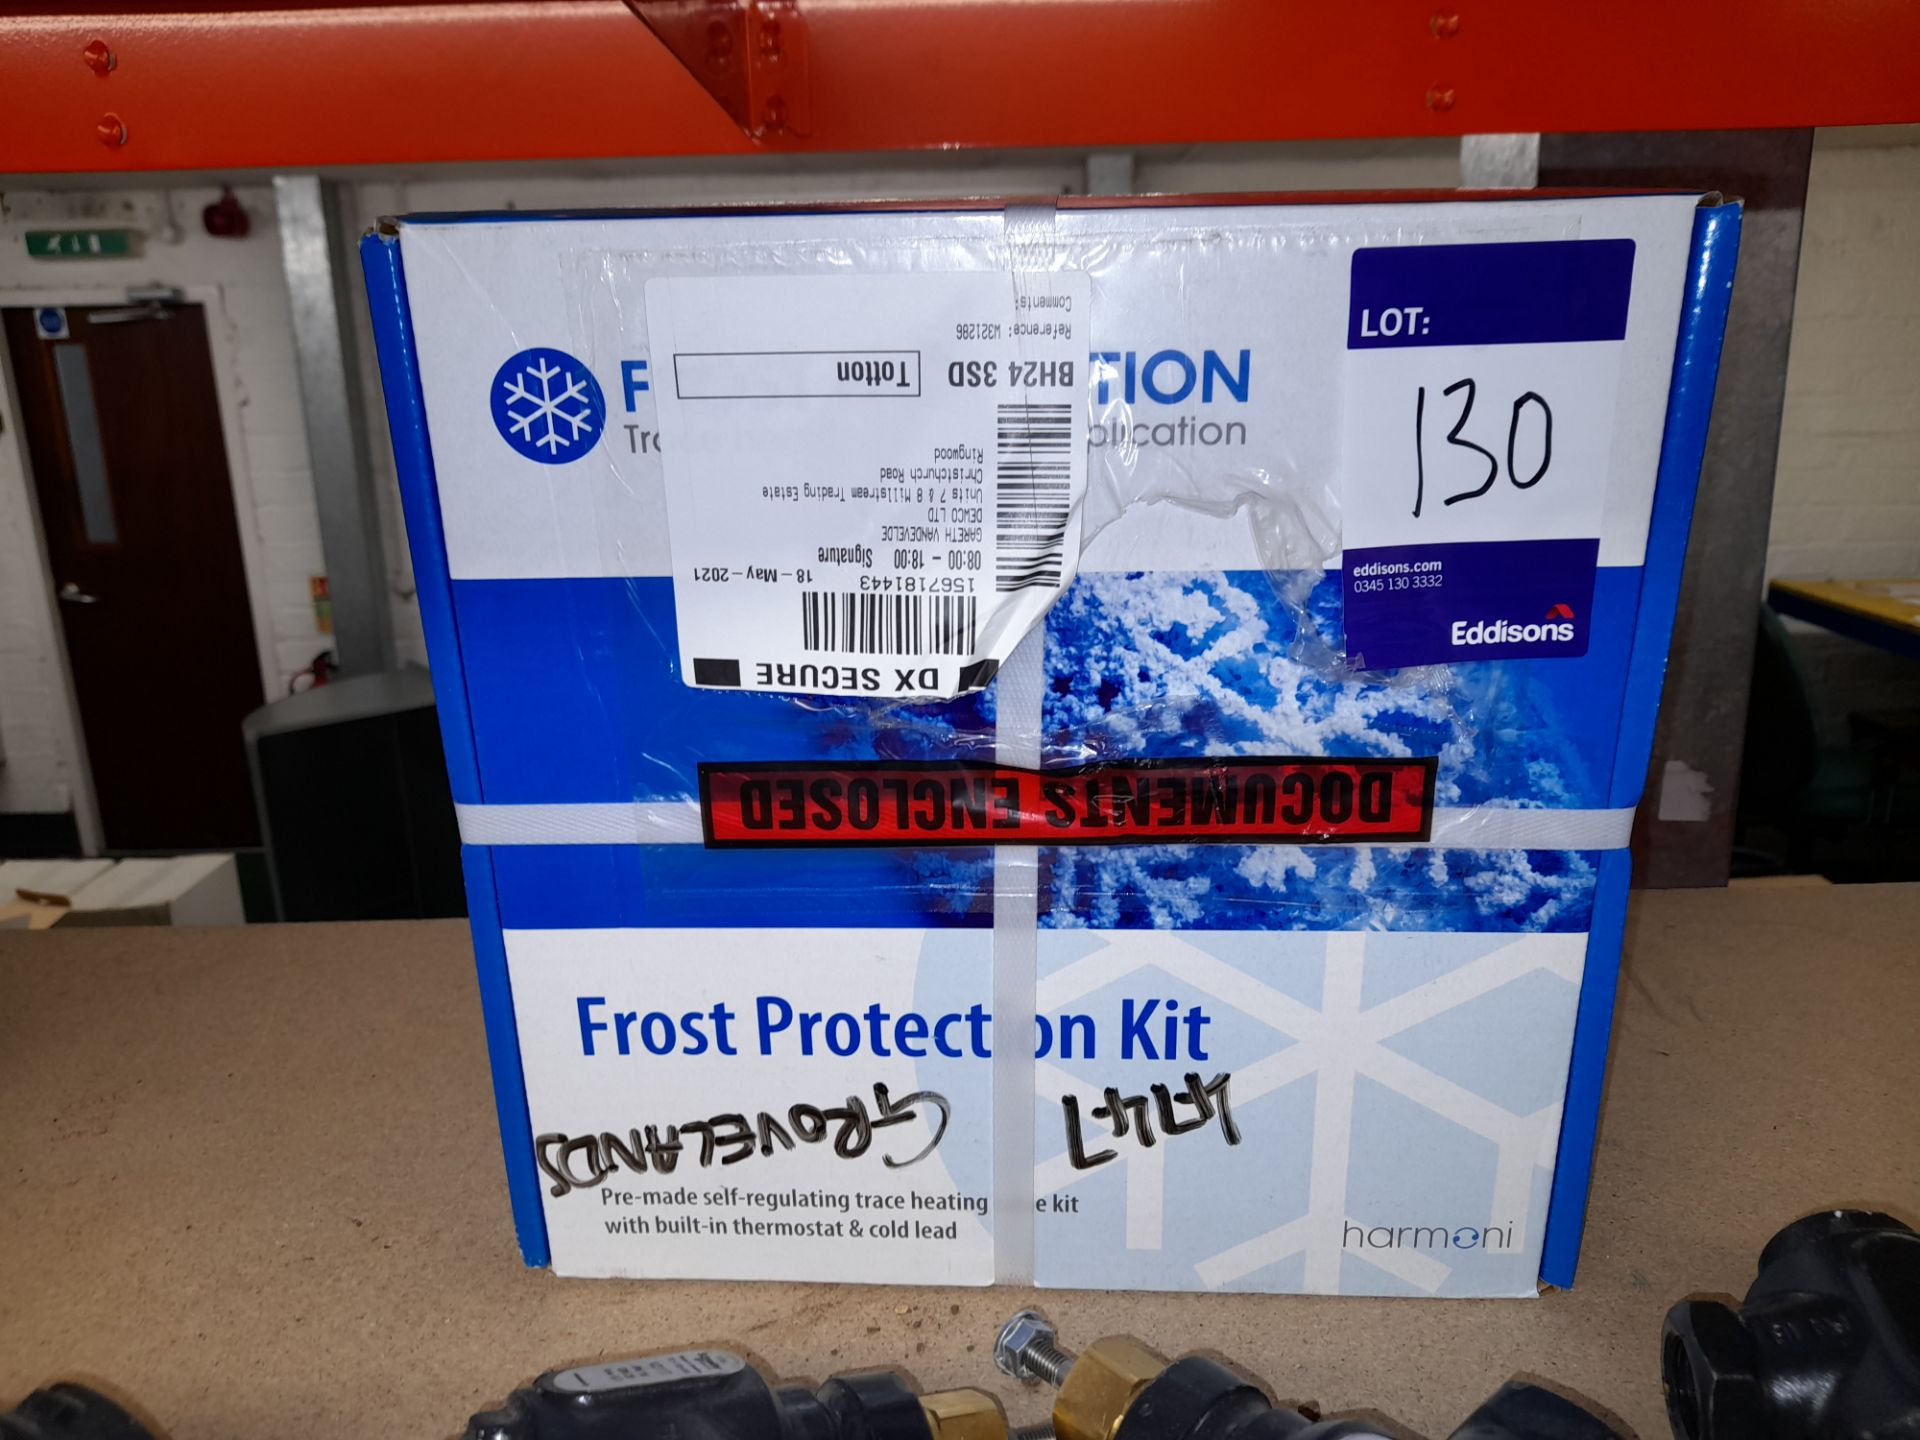 Contents to shelf to include 3 x Boxes of Frost Protection Kit, 10 x boxes of Daikin Human Comfort - Image 2 of 5